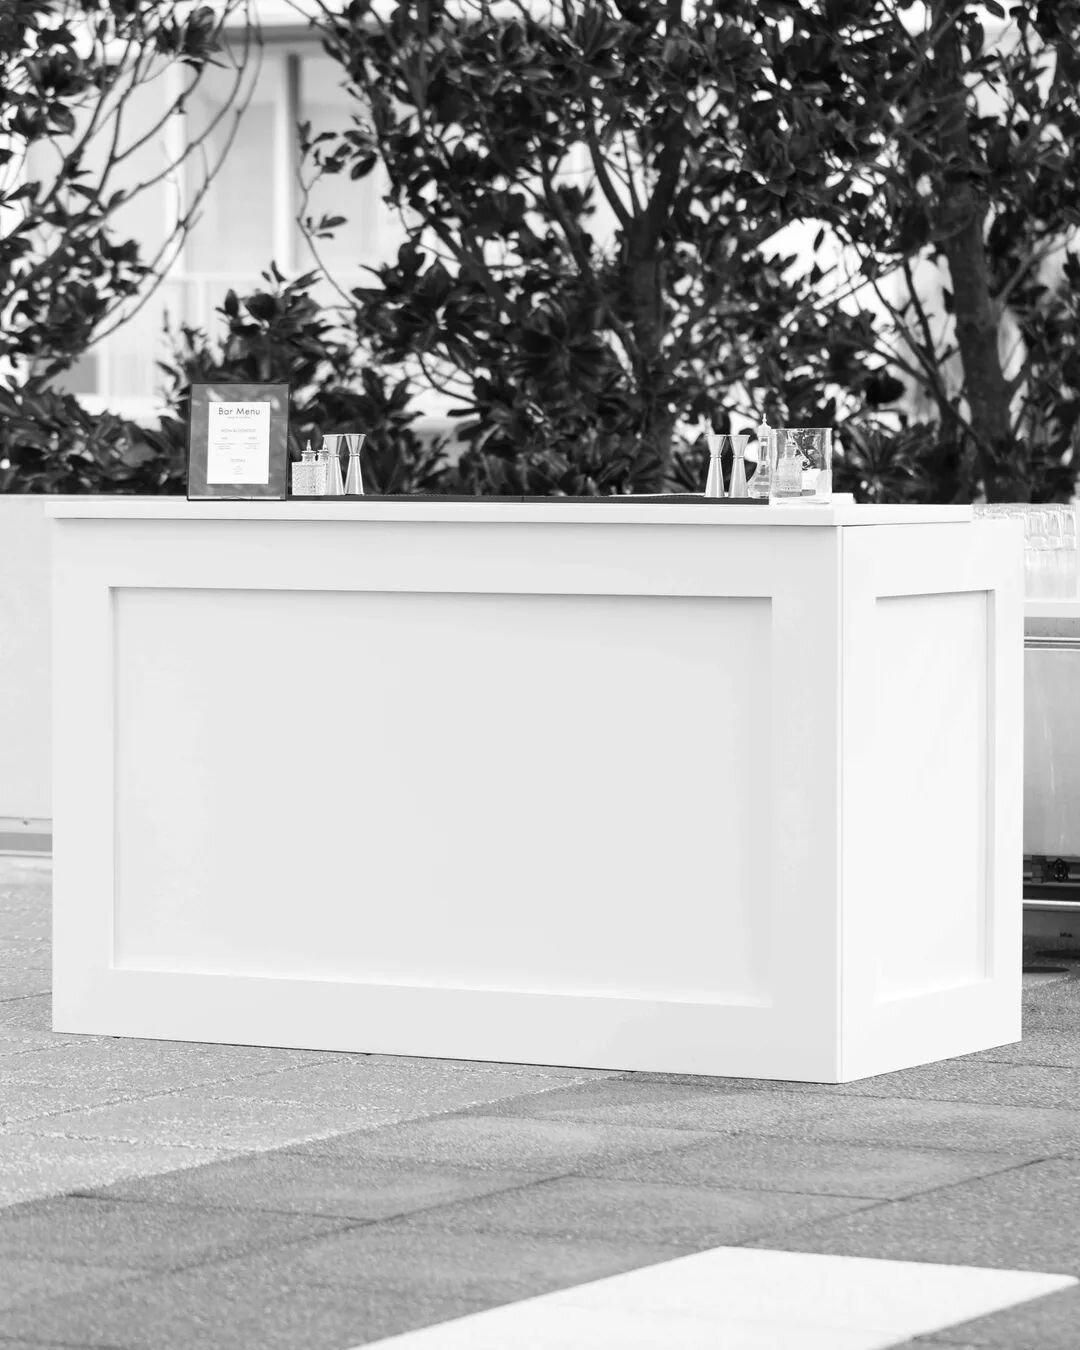 Our white Shaker Bar @thebalconyorlando ! We are happy to say there will be optional Pedestals coming early next year for the Shaker Bar. This will give the bar a more traditional look and allow for more layout arrangements. 

On a different note, ou